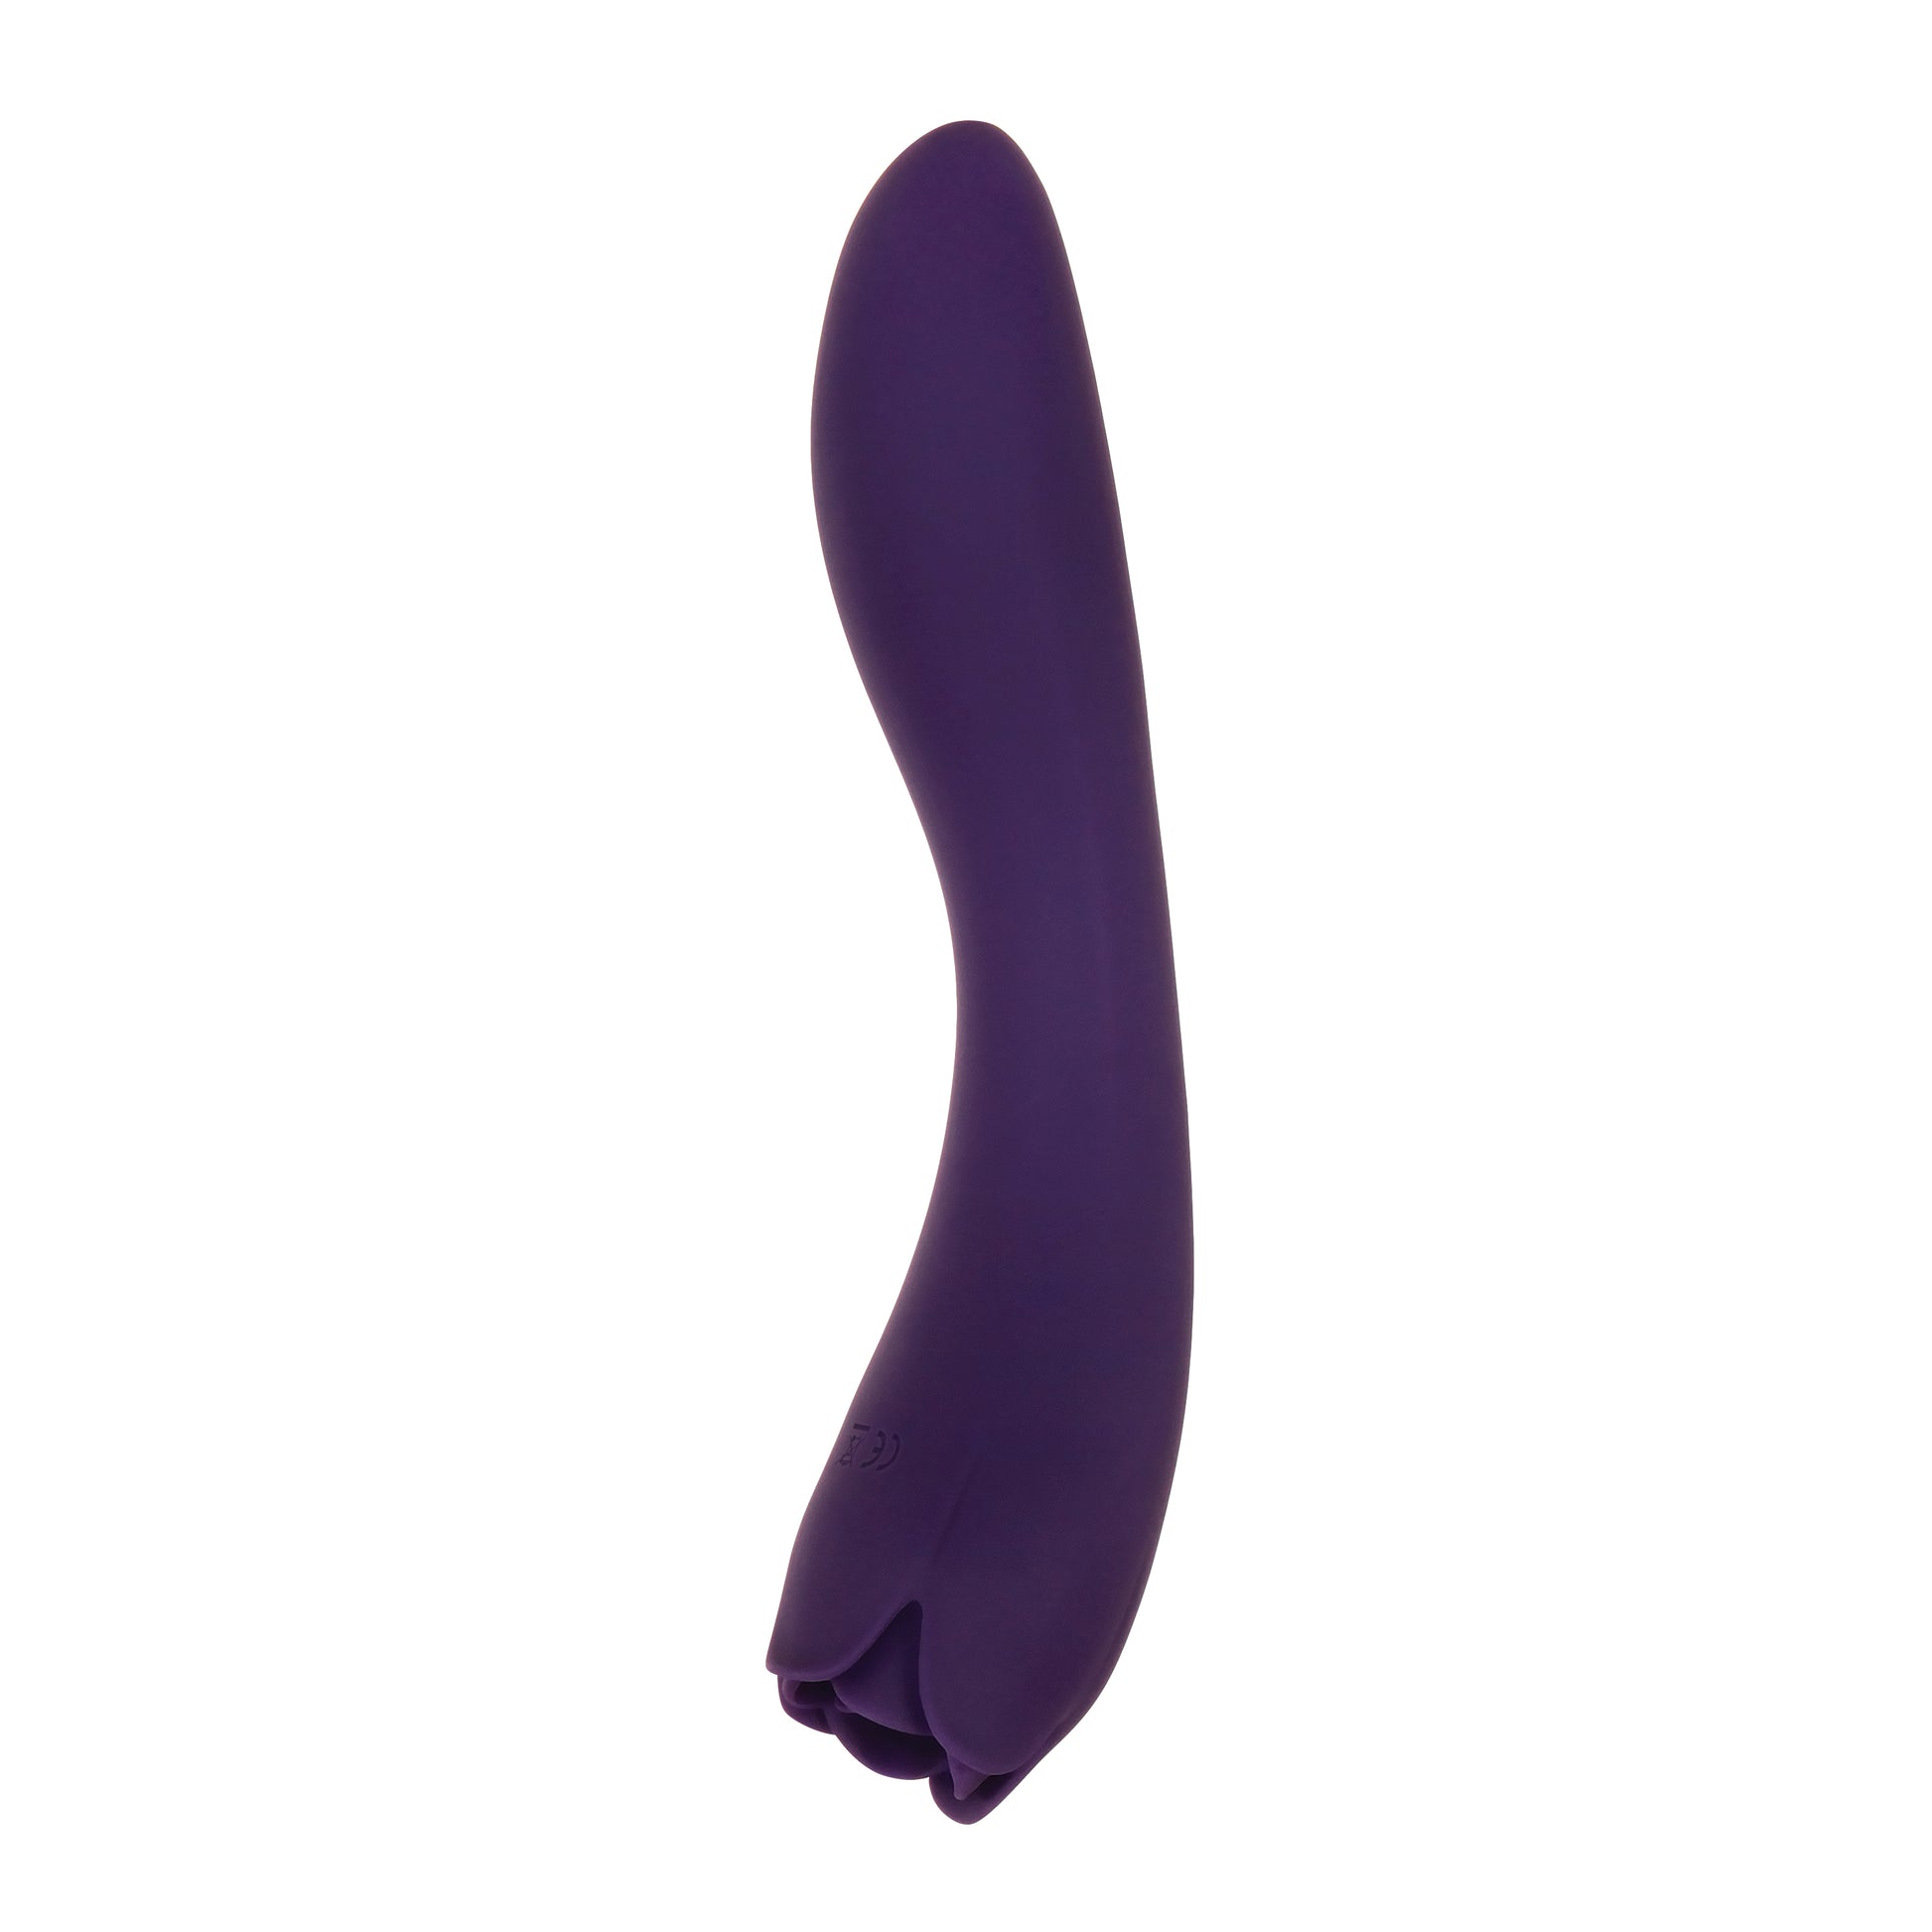 Evolved Thorny Rose Dual Massager - XOXTOYS